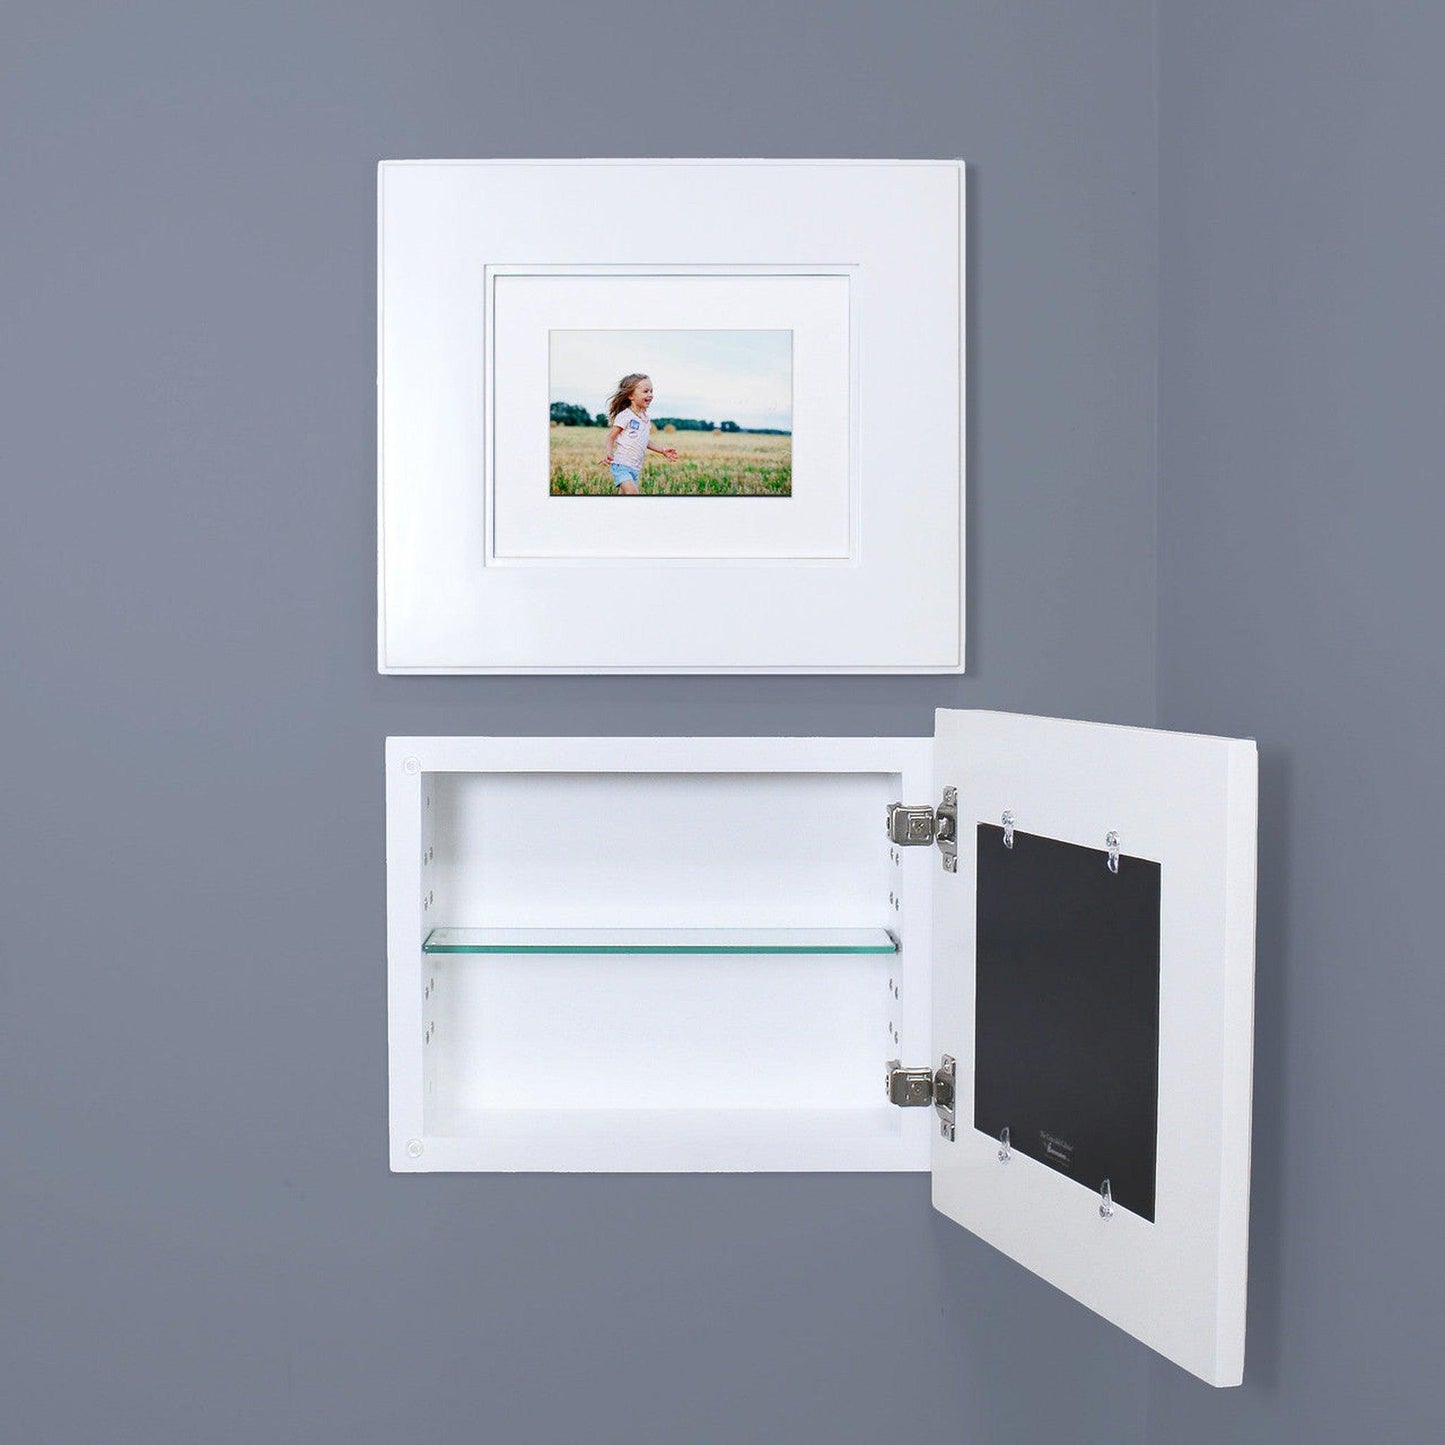 Fox Hollow Furnishings 14" x 11" White Compact Landscape Shaker Special 6" Depth Recessed Picture Frame Medicine Cabinet With Mirror and White Matting